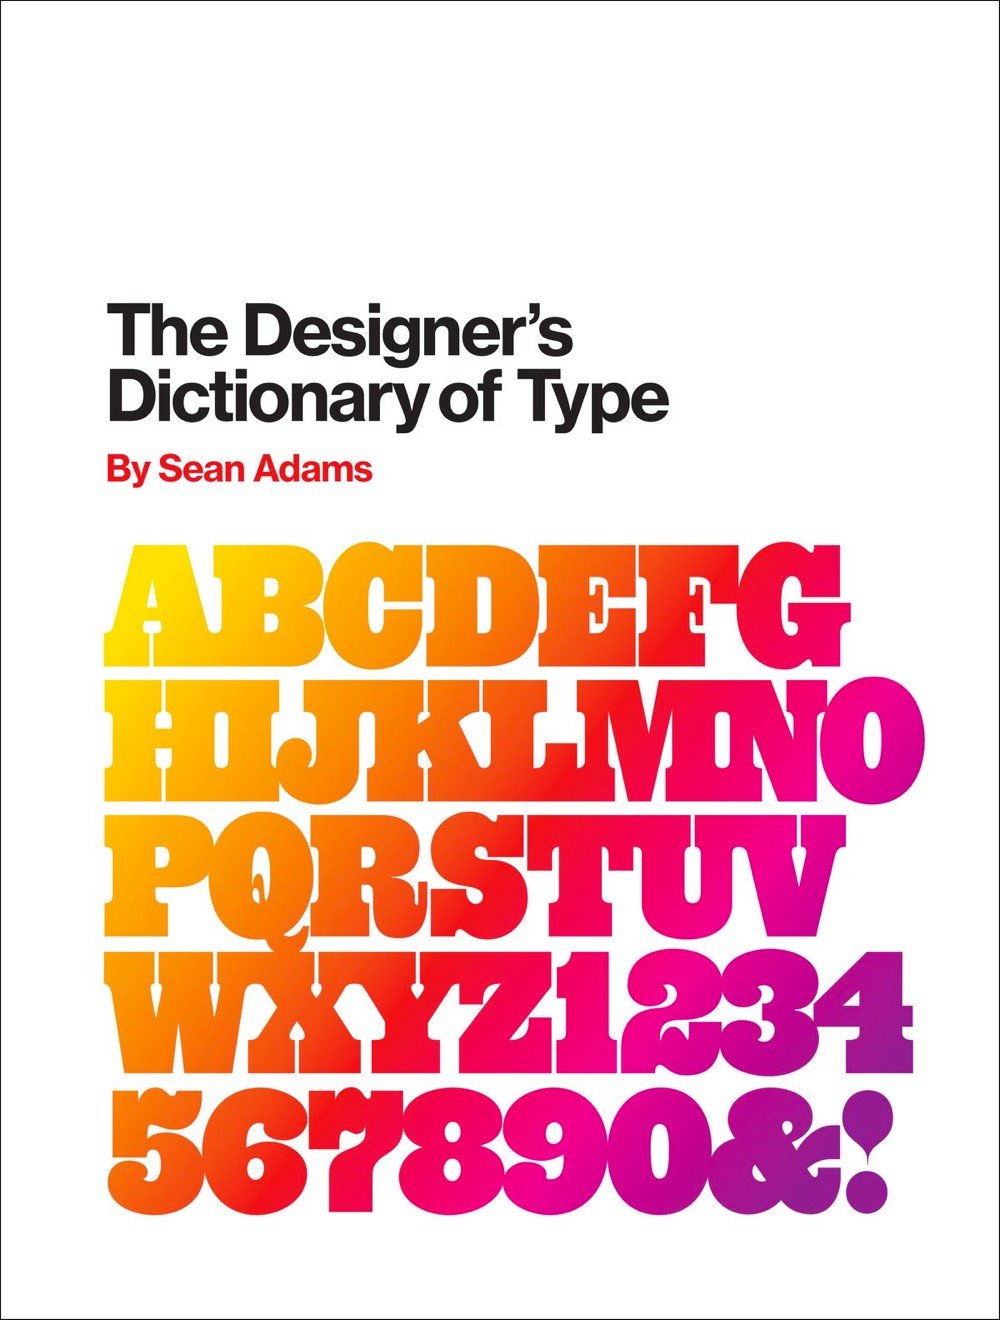 Designers Dictionary of Type